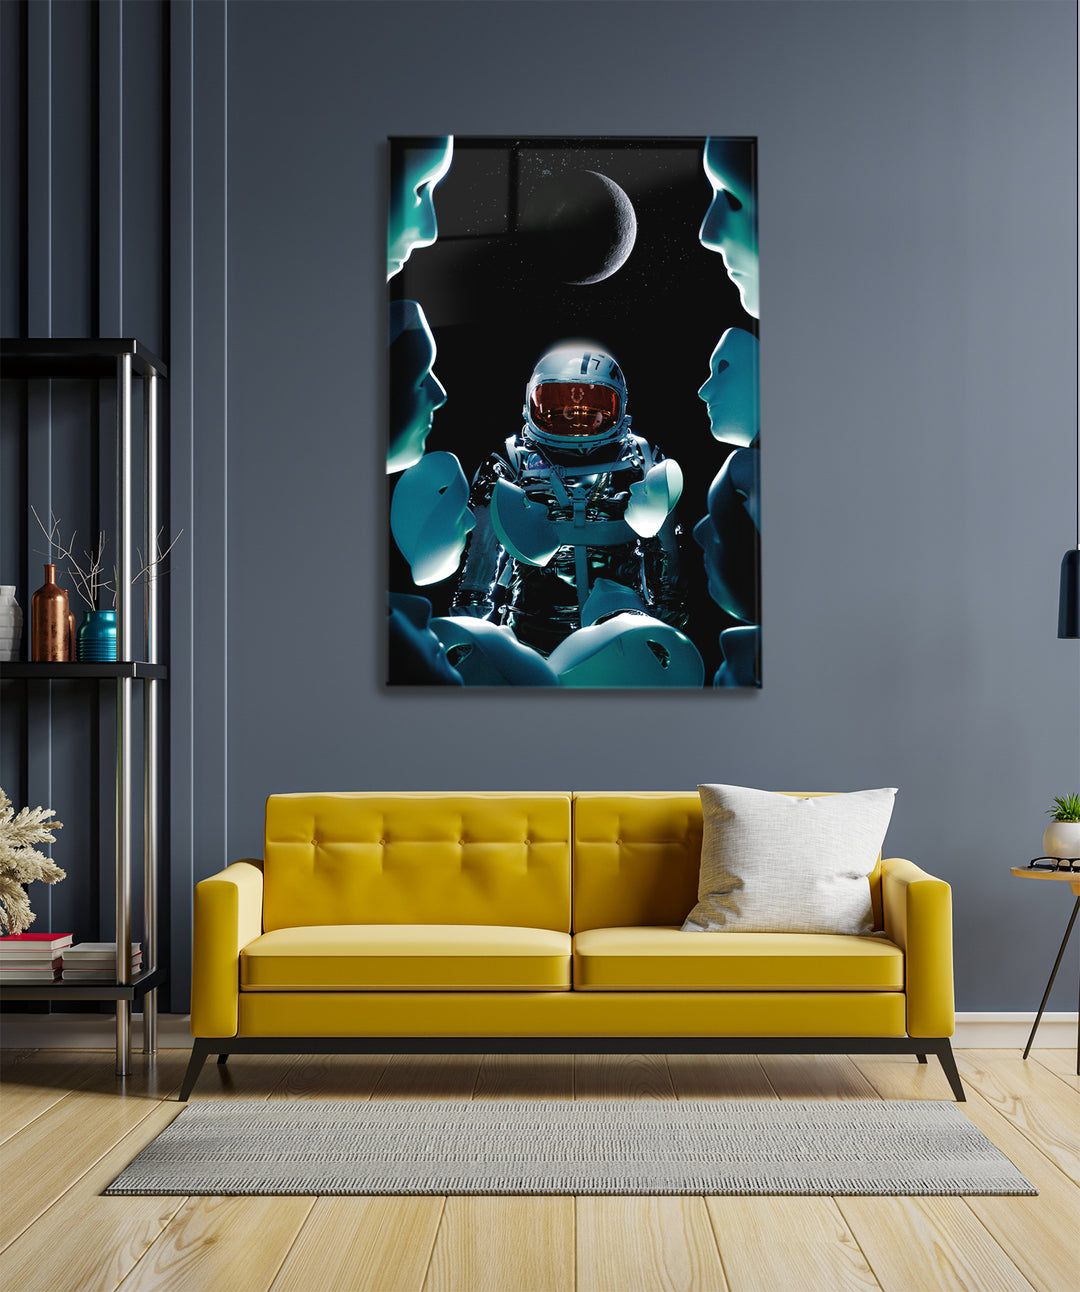 Acrylic Modern Wall Art Astronaut Series - Acrylic Wall Art - Picture Photo Printing Artwork - Multiple Size Options (ASTRO001) - egraphicstore